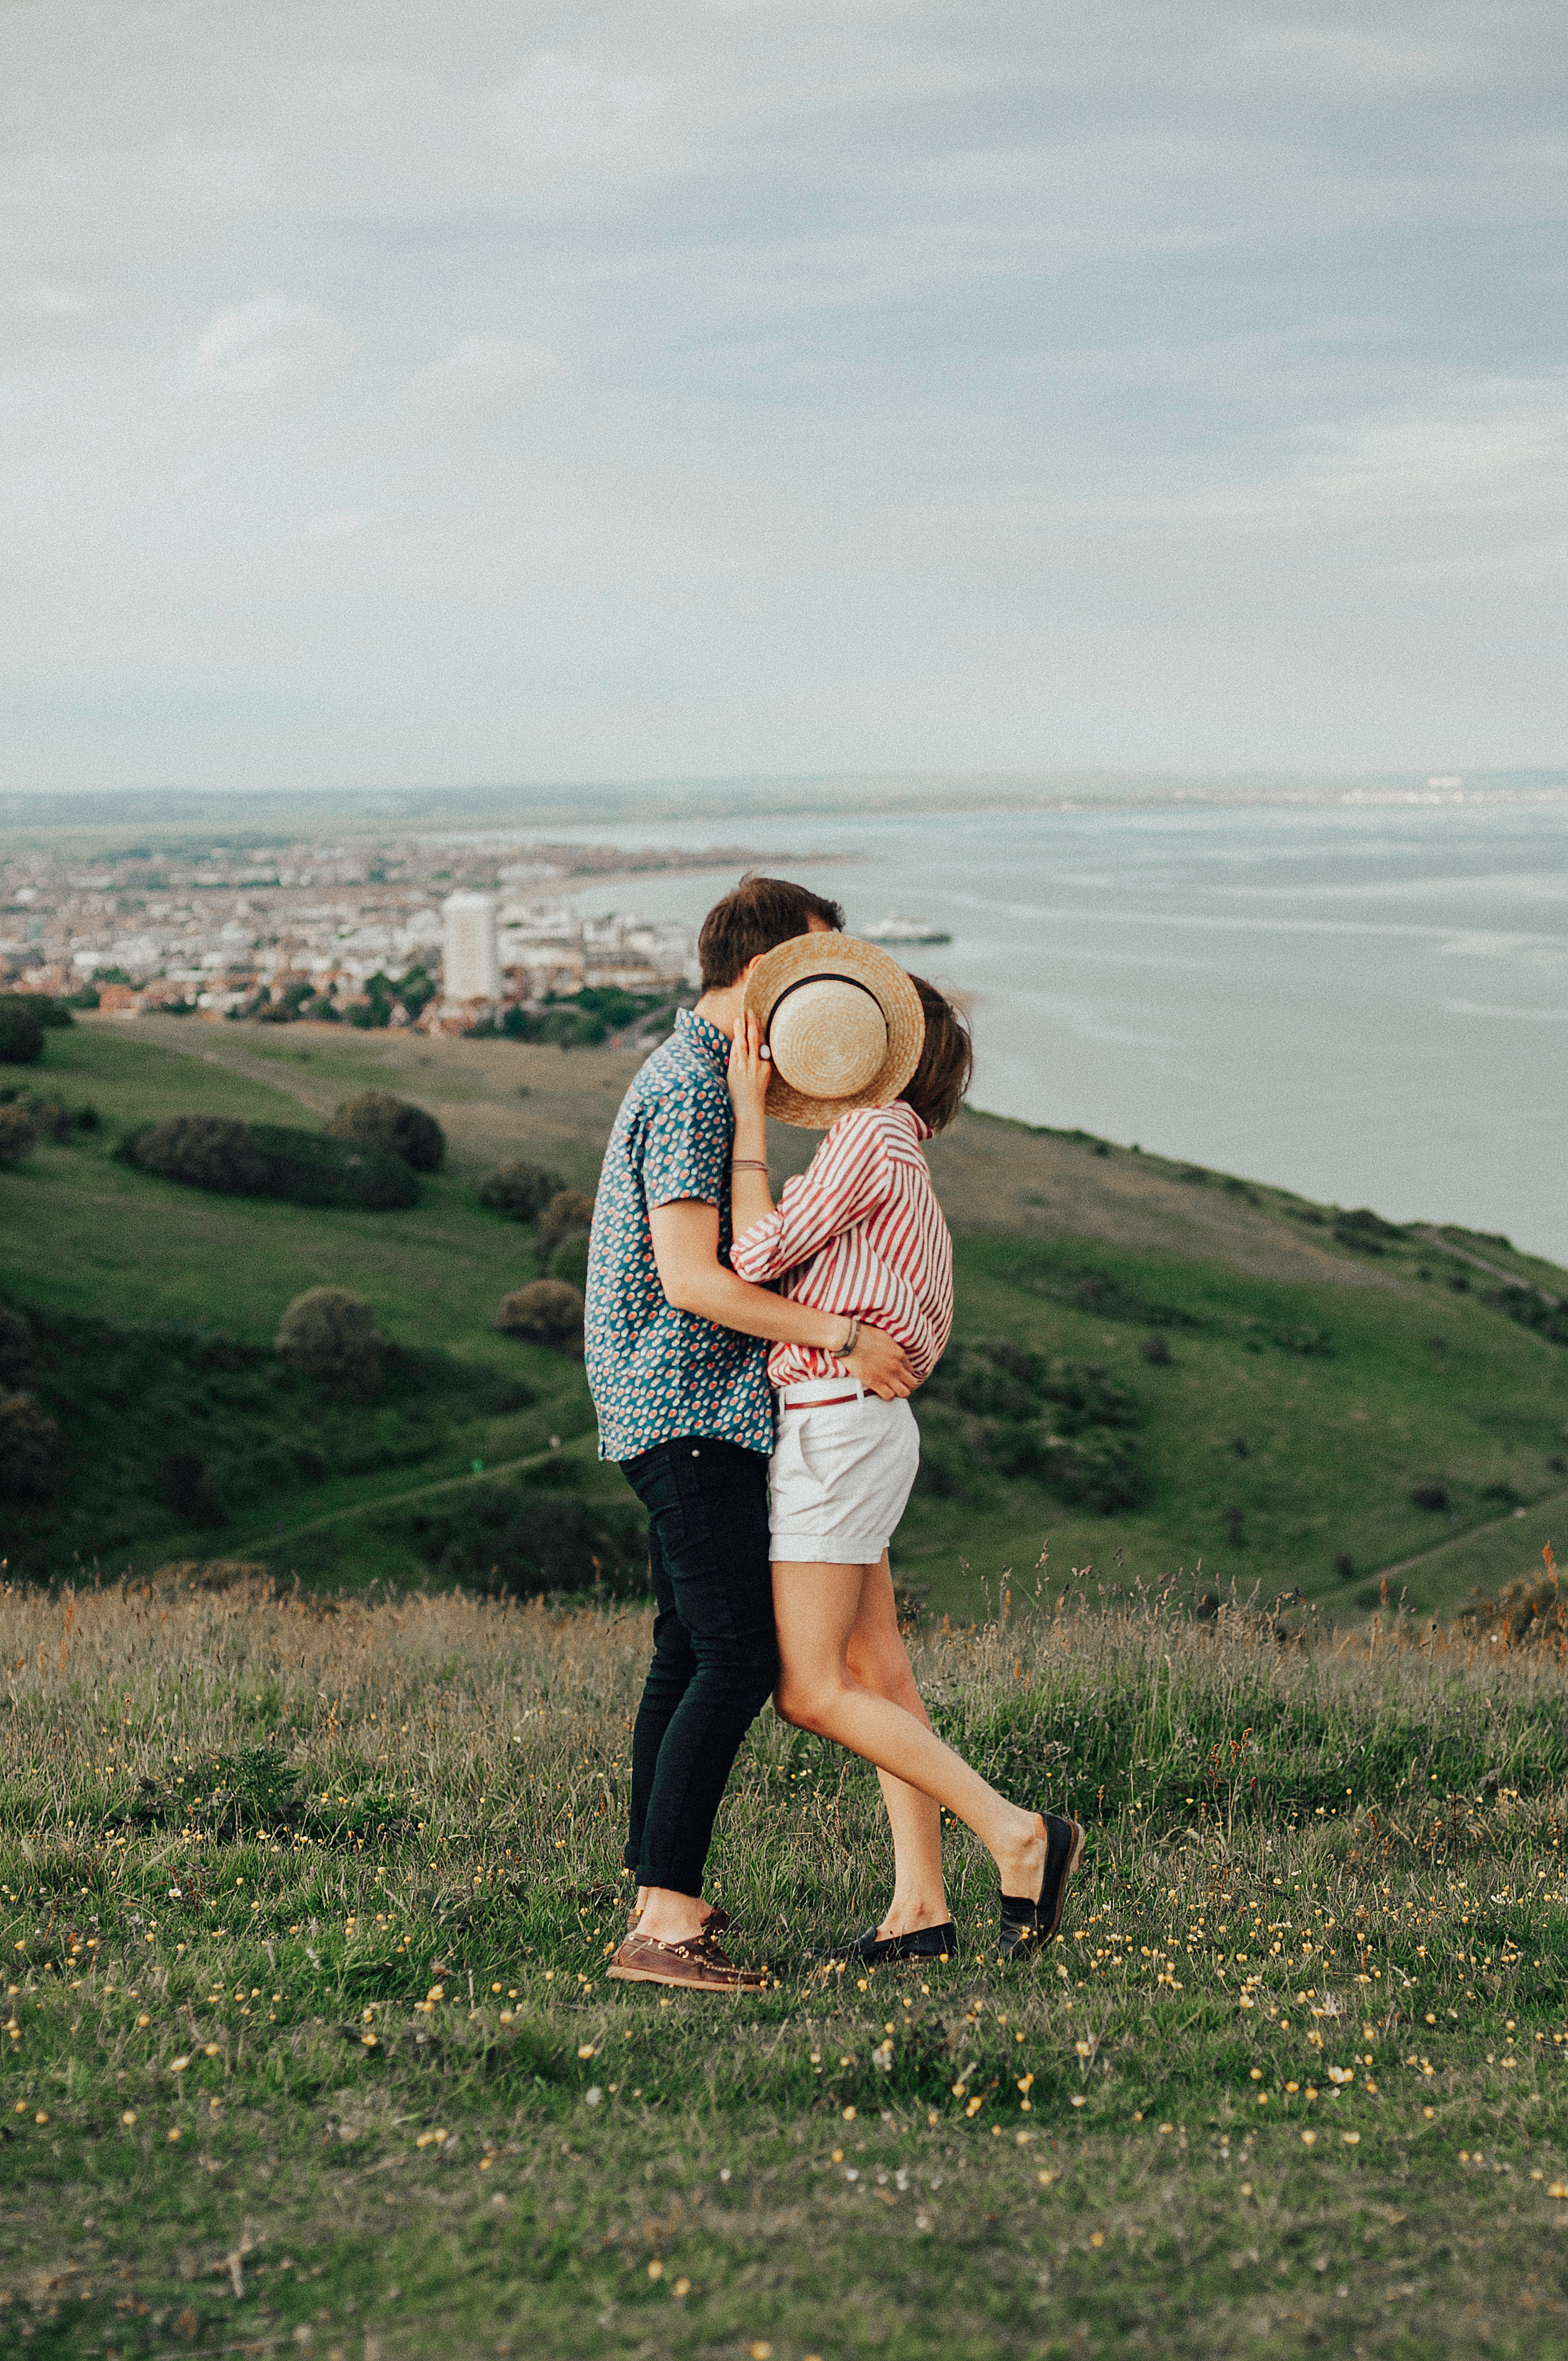 16 Little Things To Keep Your Partner Happy So They Don’t Have To Ask